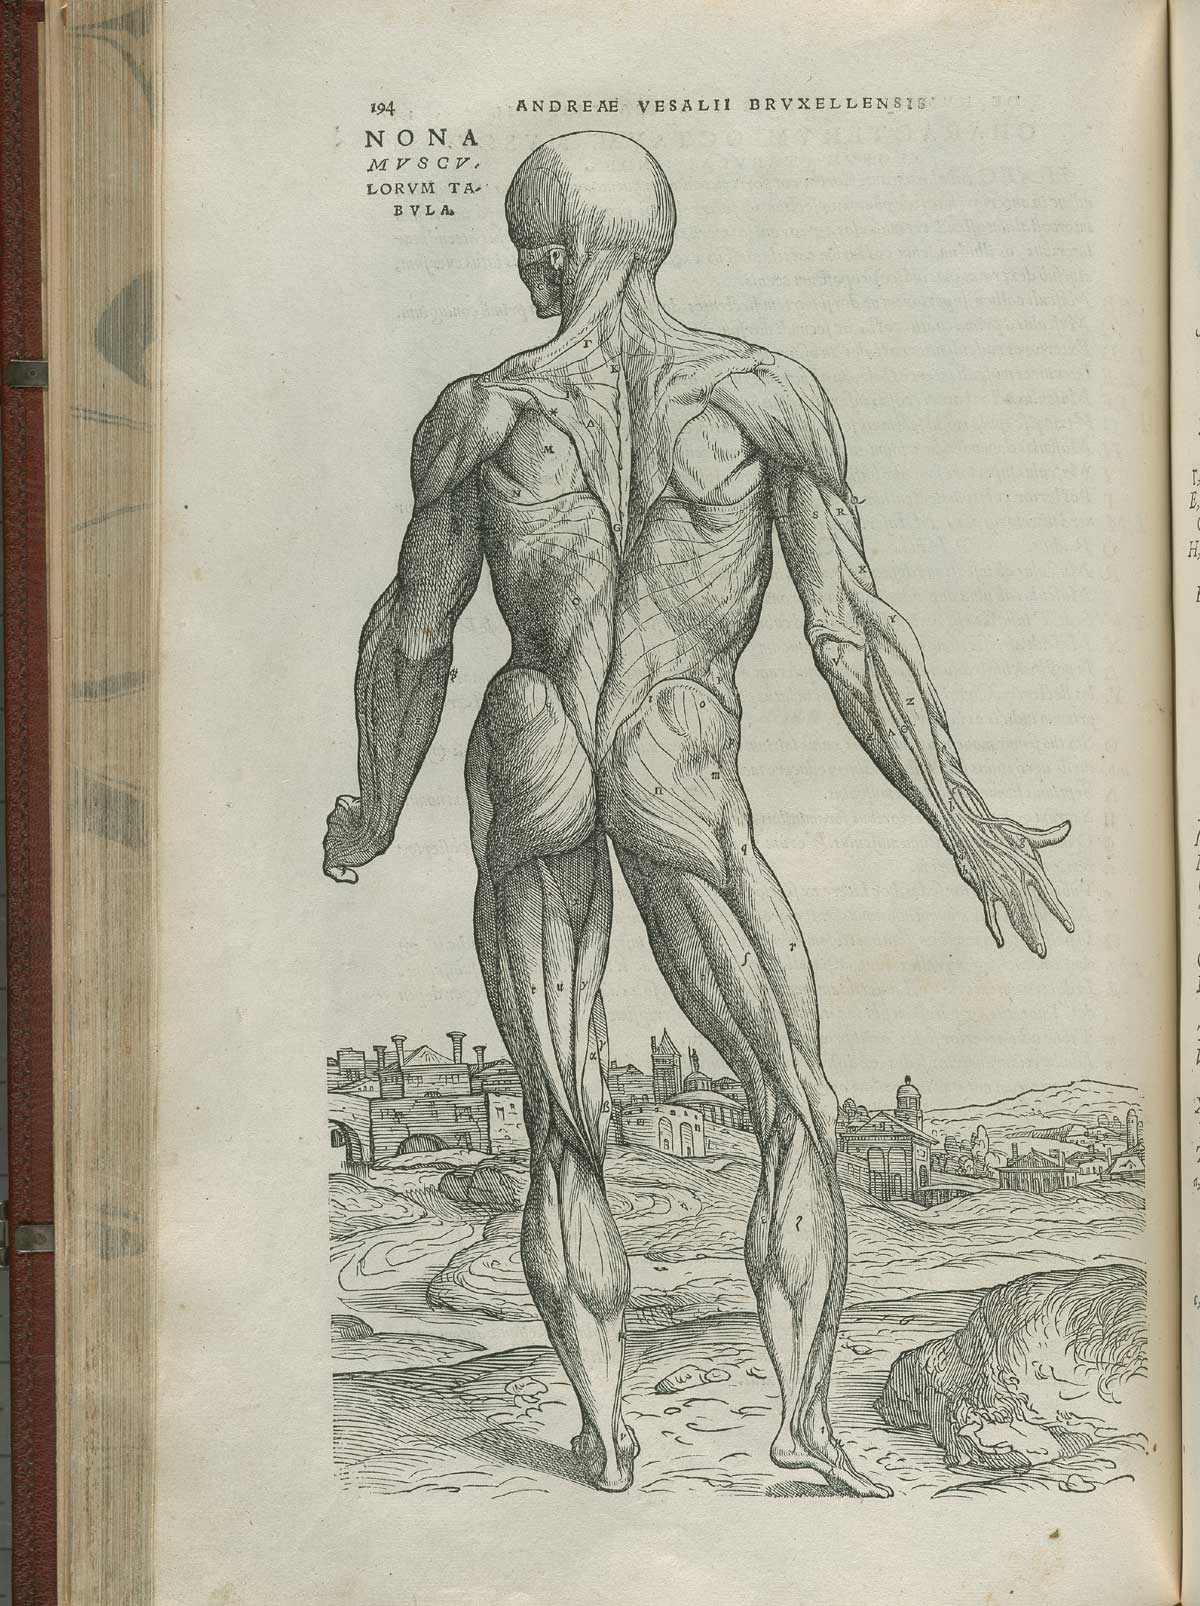 Page 194 of Andreas Vesalius' De corporis humani fabrica libri septem, featuring the illustrated woodcut of the ninth muscle plate, a full-length posterior view of a standing nude male in landscape. His skin is flayed with head head facing to the left displaying the muscles of the back of the body.